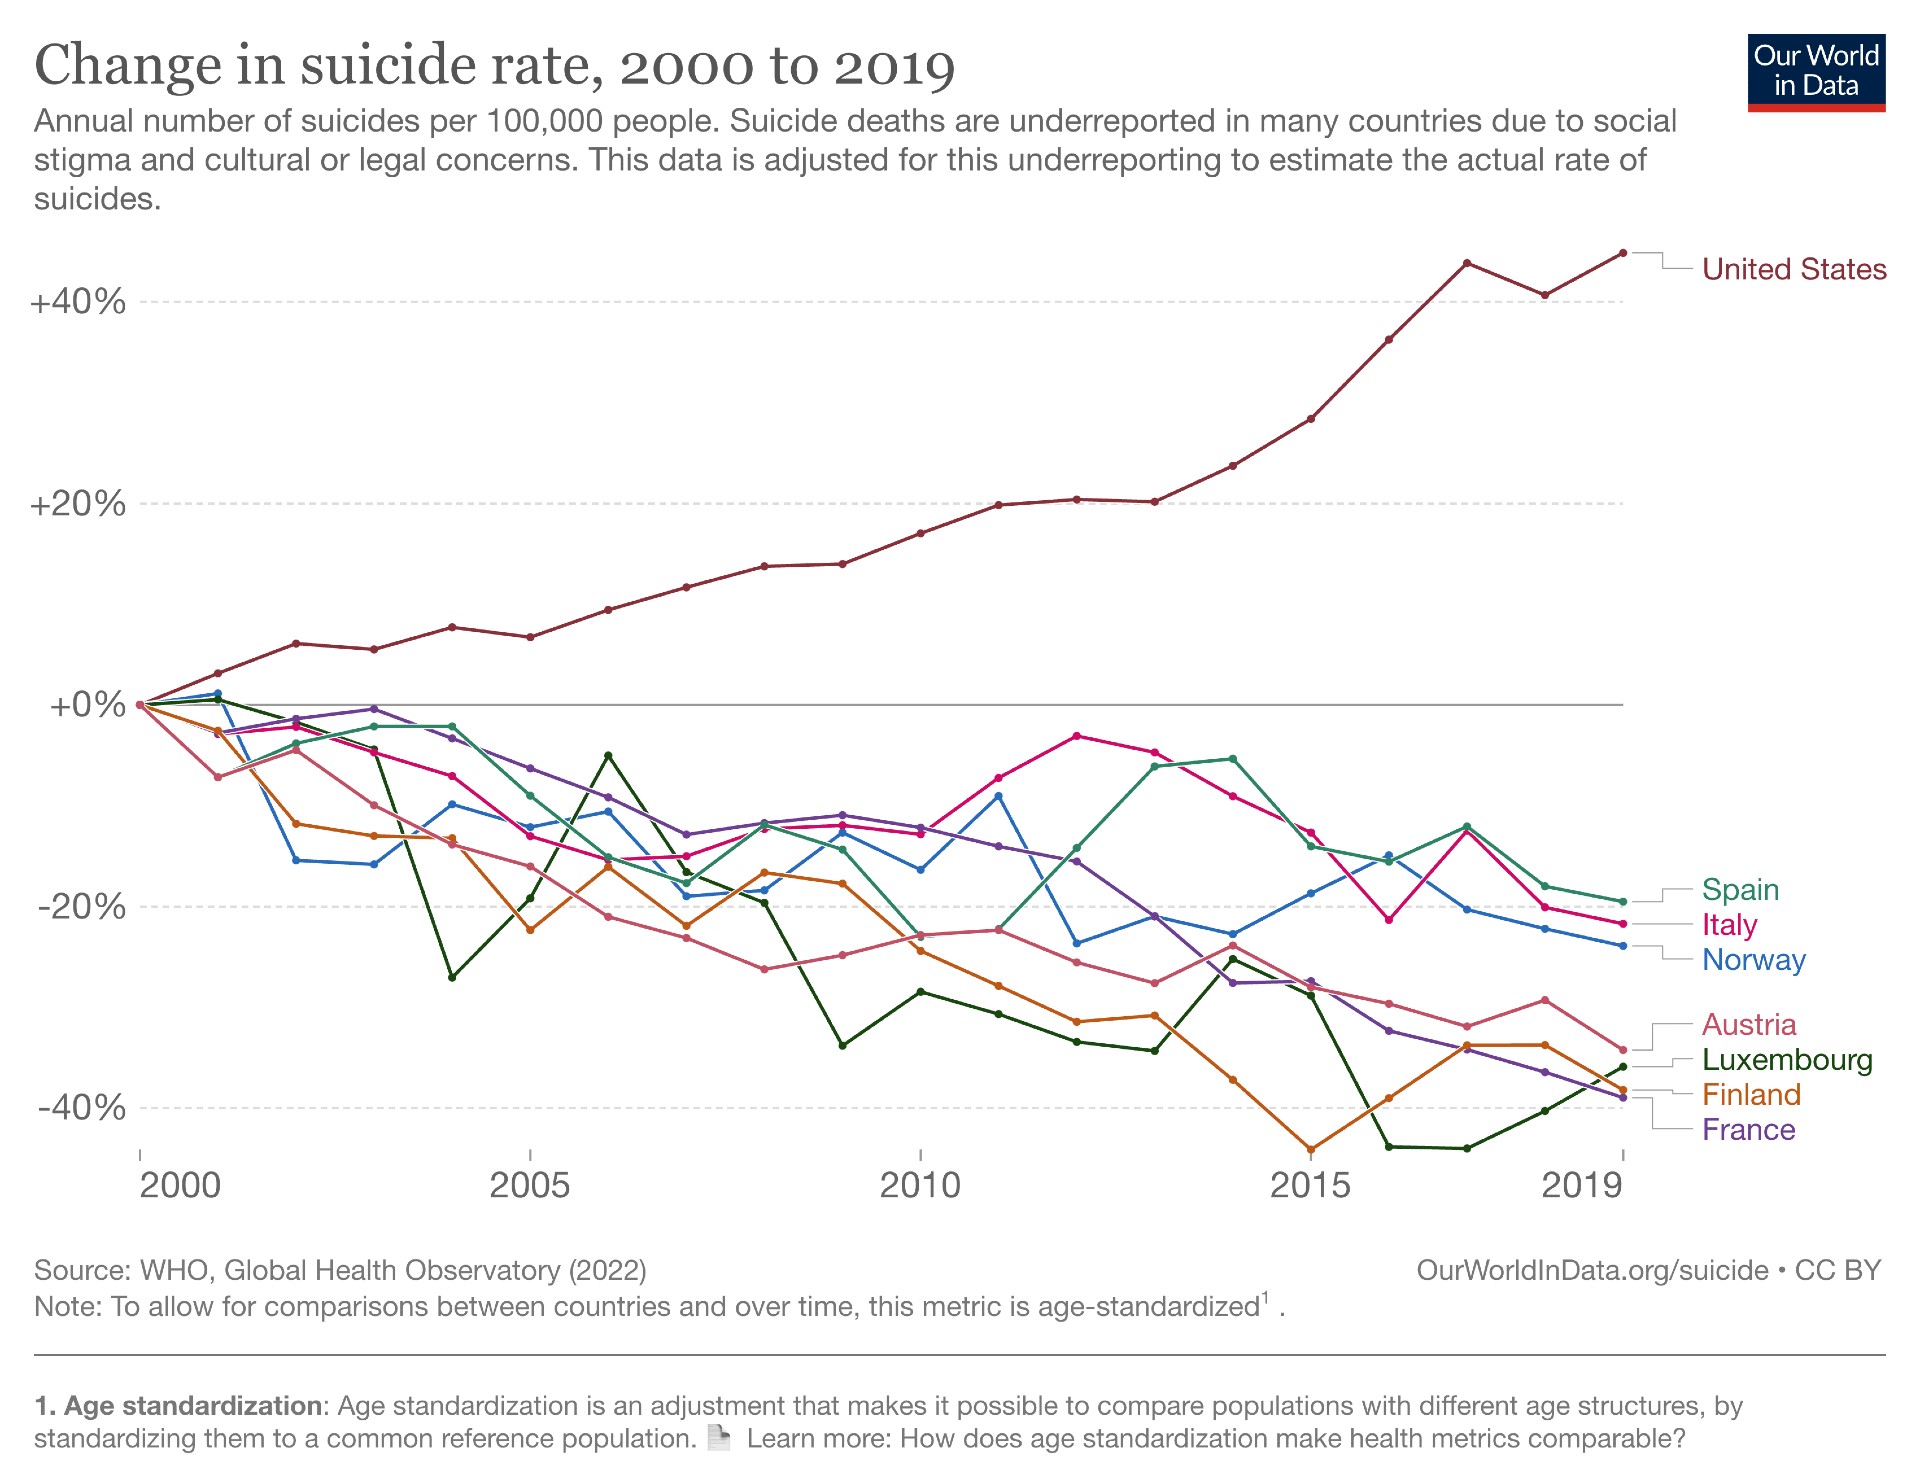 A line graph showing change in suicide rate from 2000 to 2010.